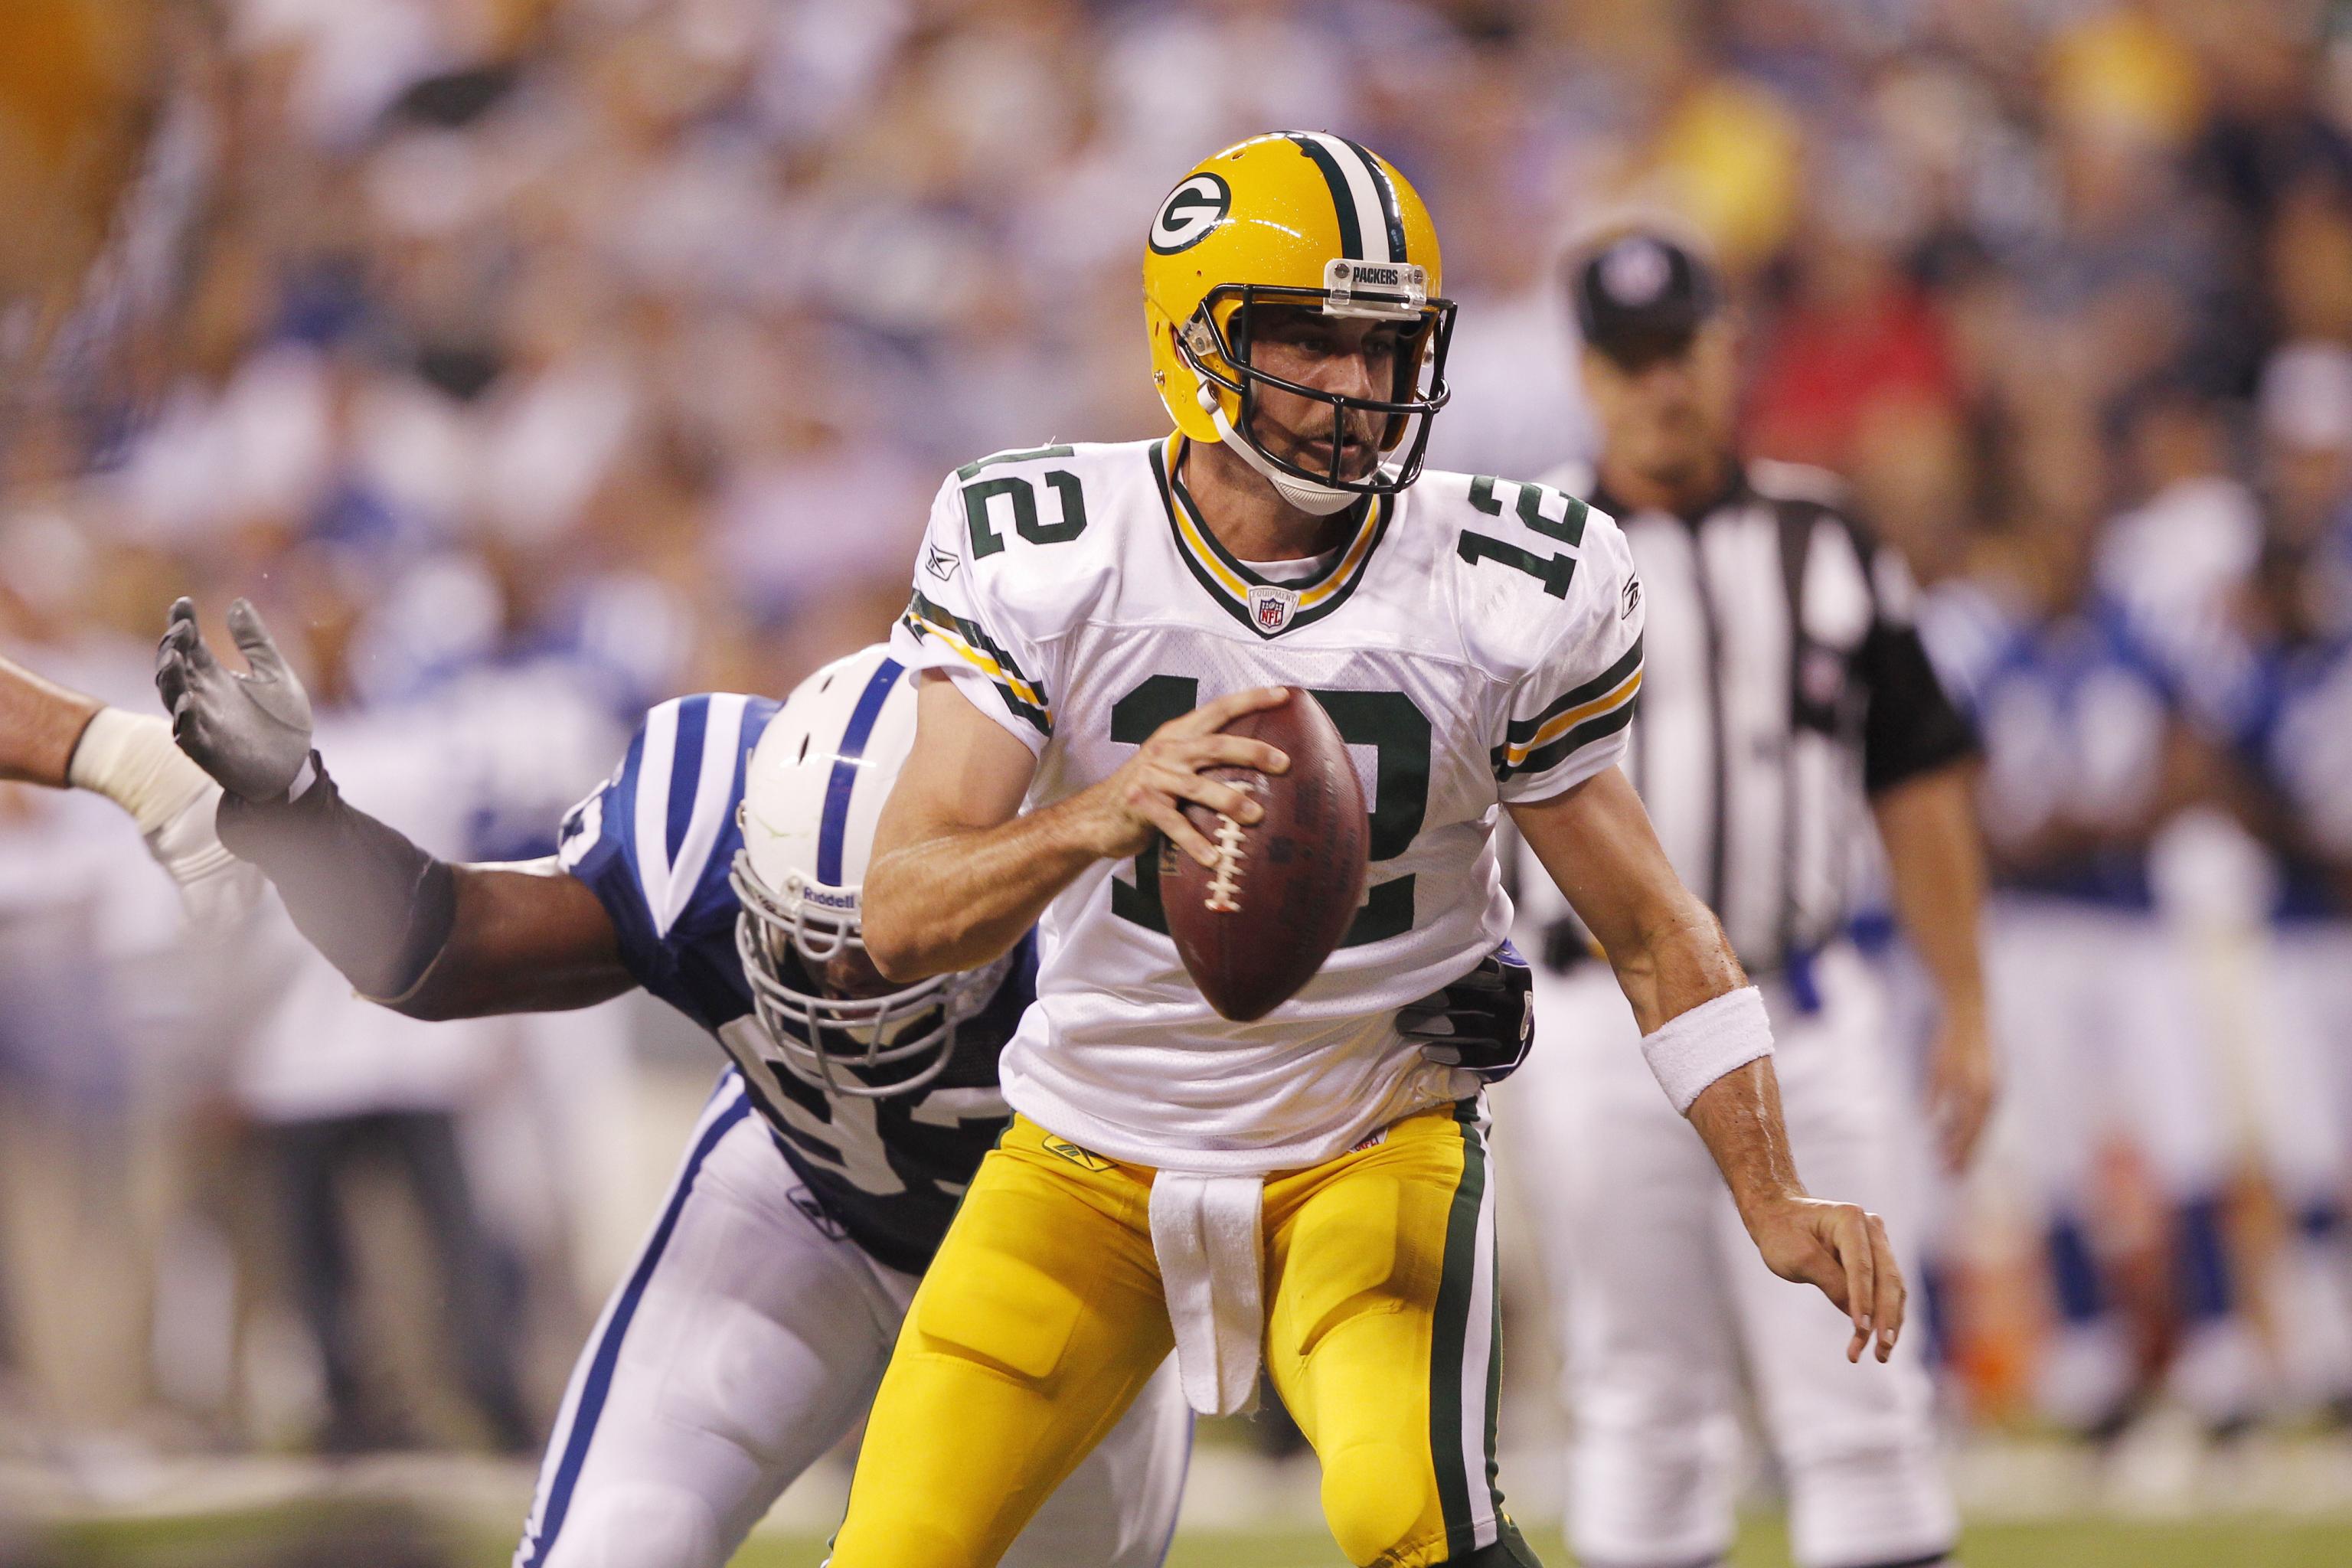 Packers vs. Colts: Some Fun Facts About the Past and Present